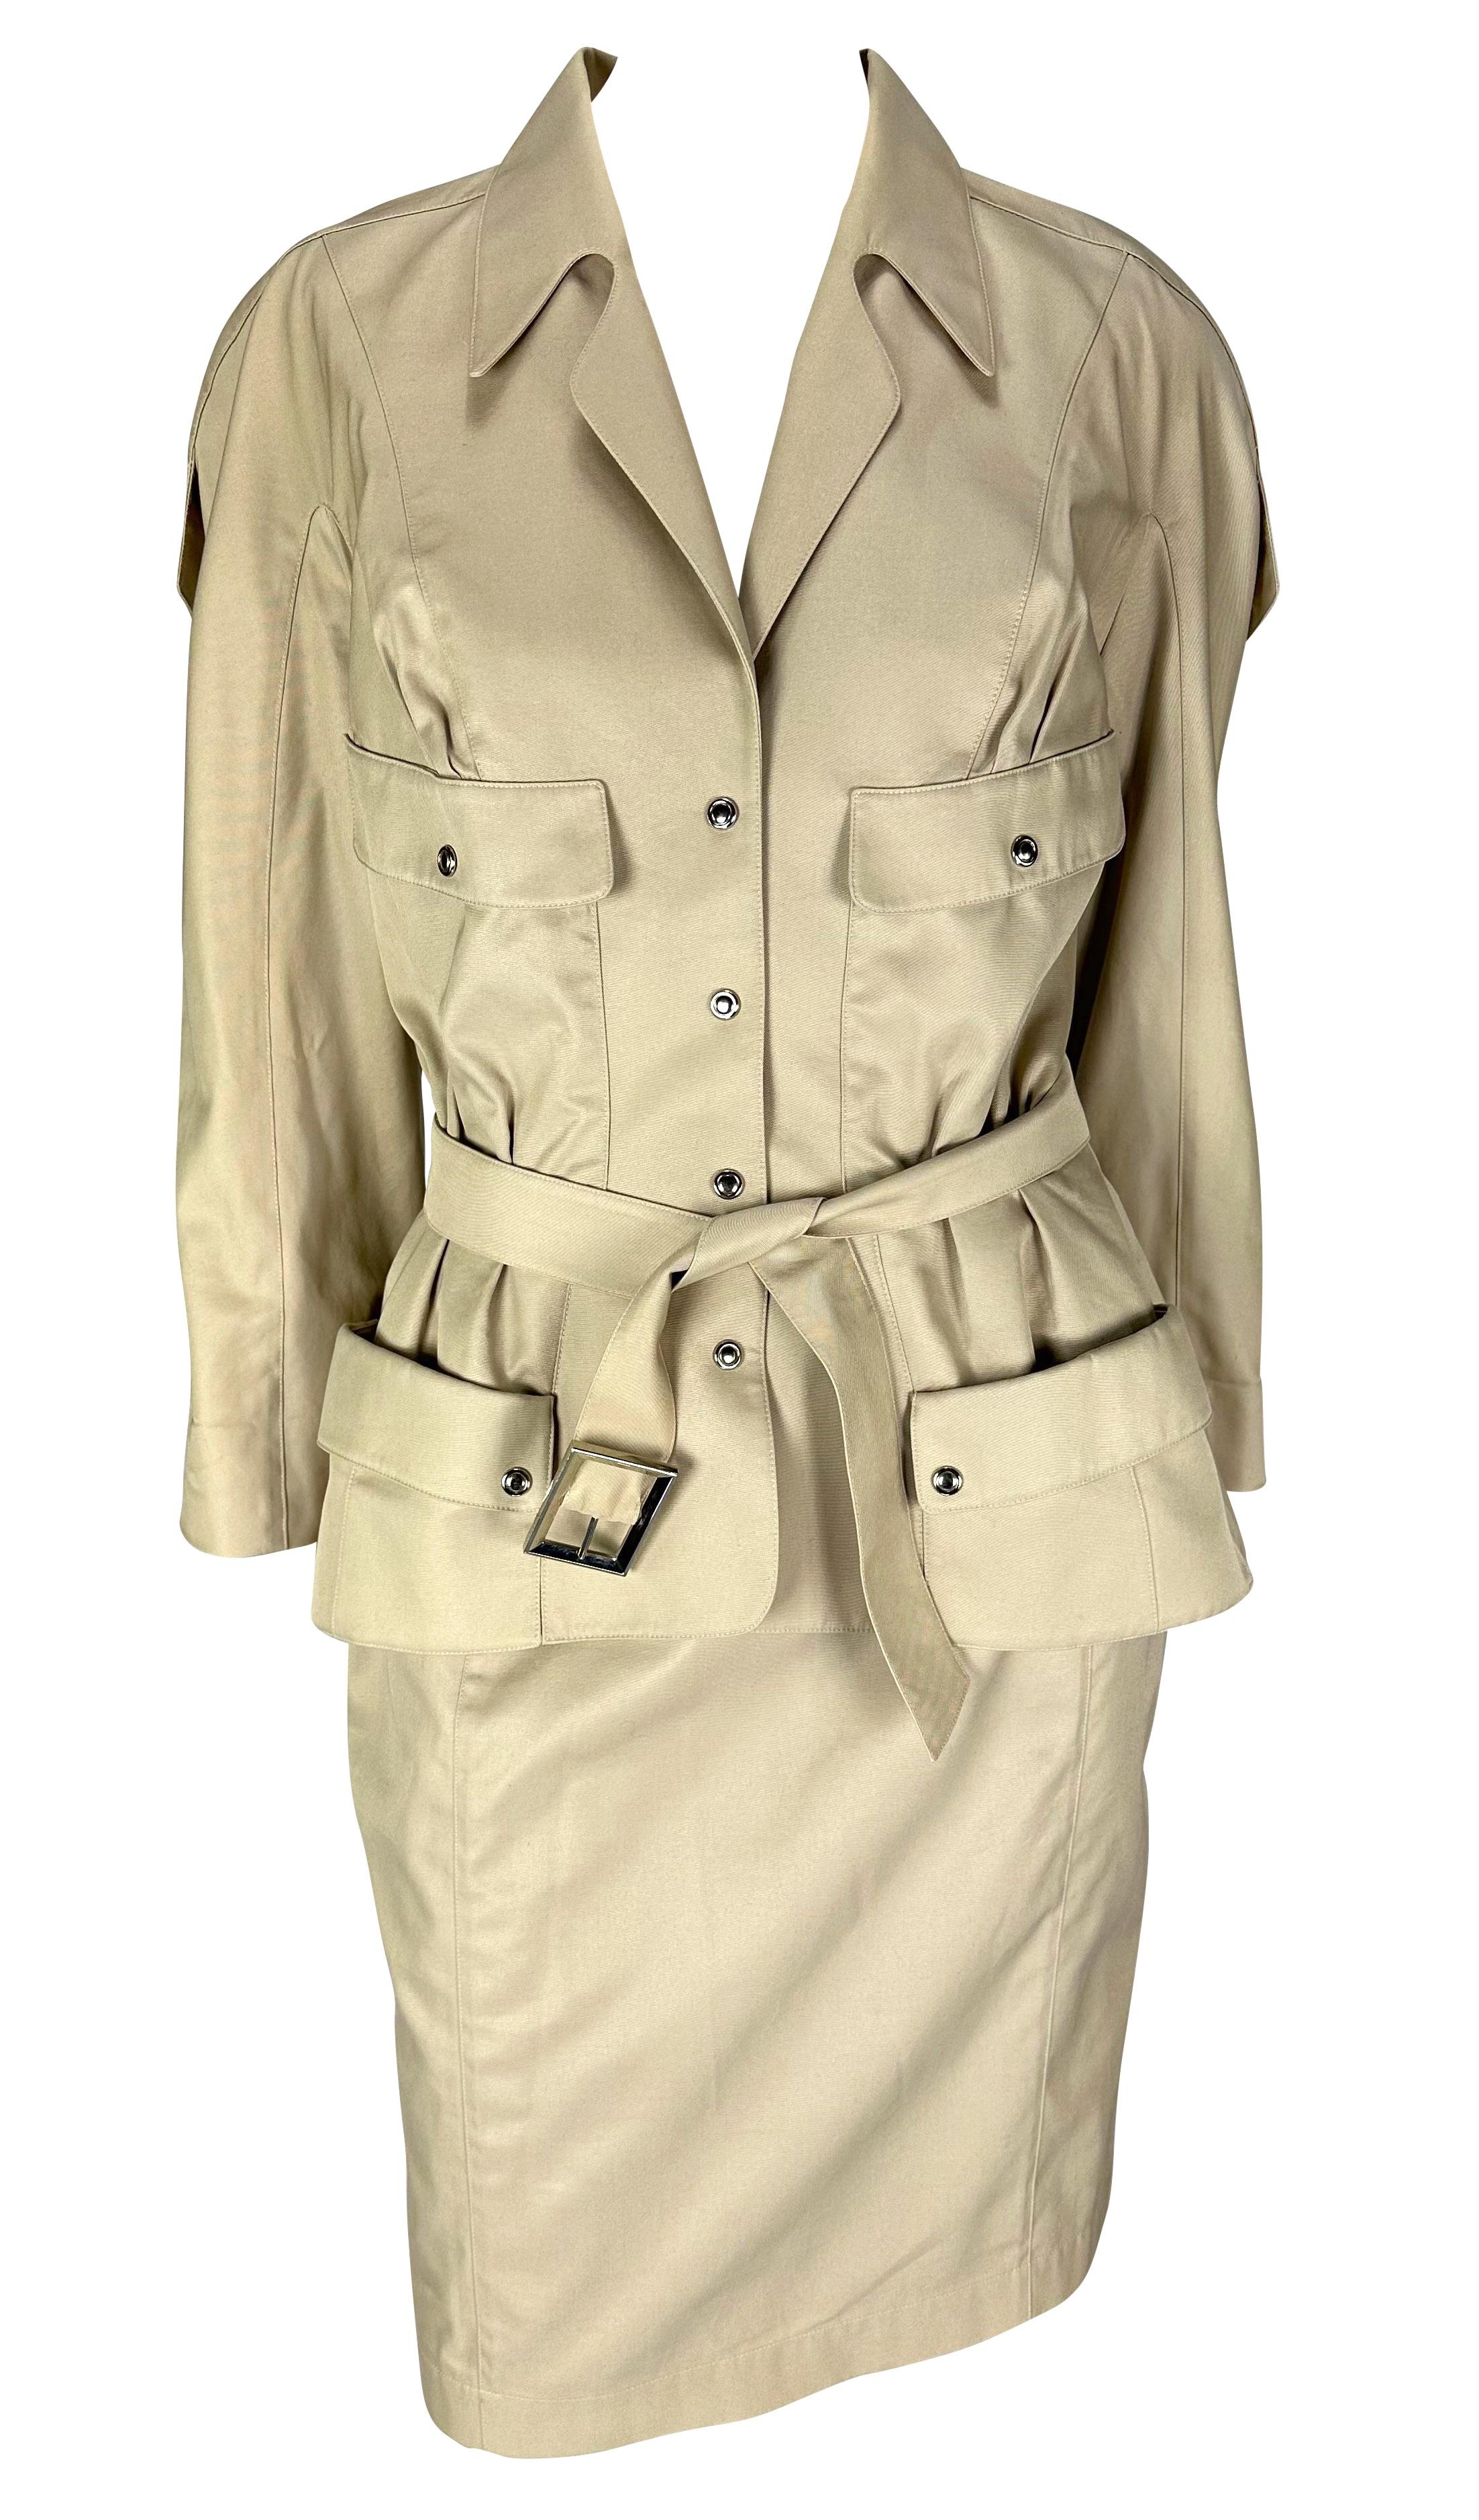 S/S 1996 Thierry Mugler Runway Khaki Cinched Belted Skirt Suit For Sale 3